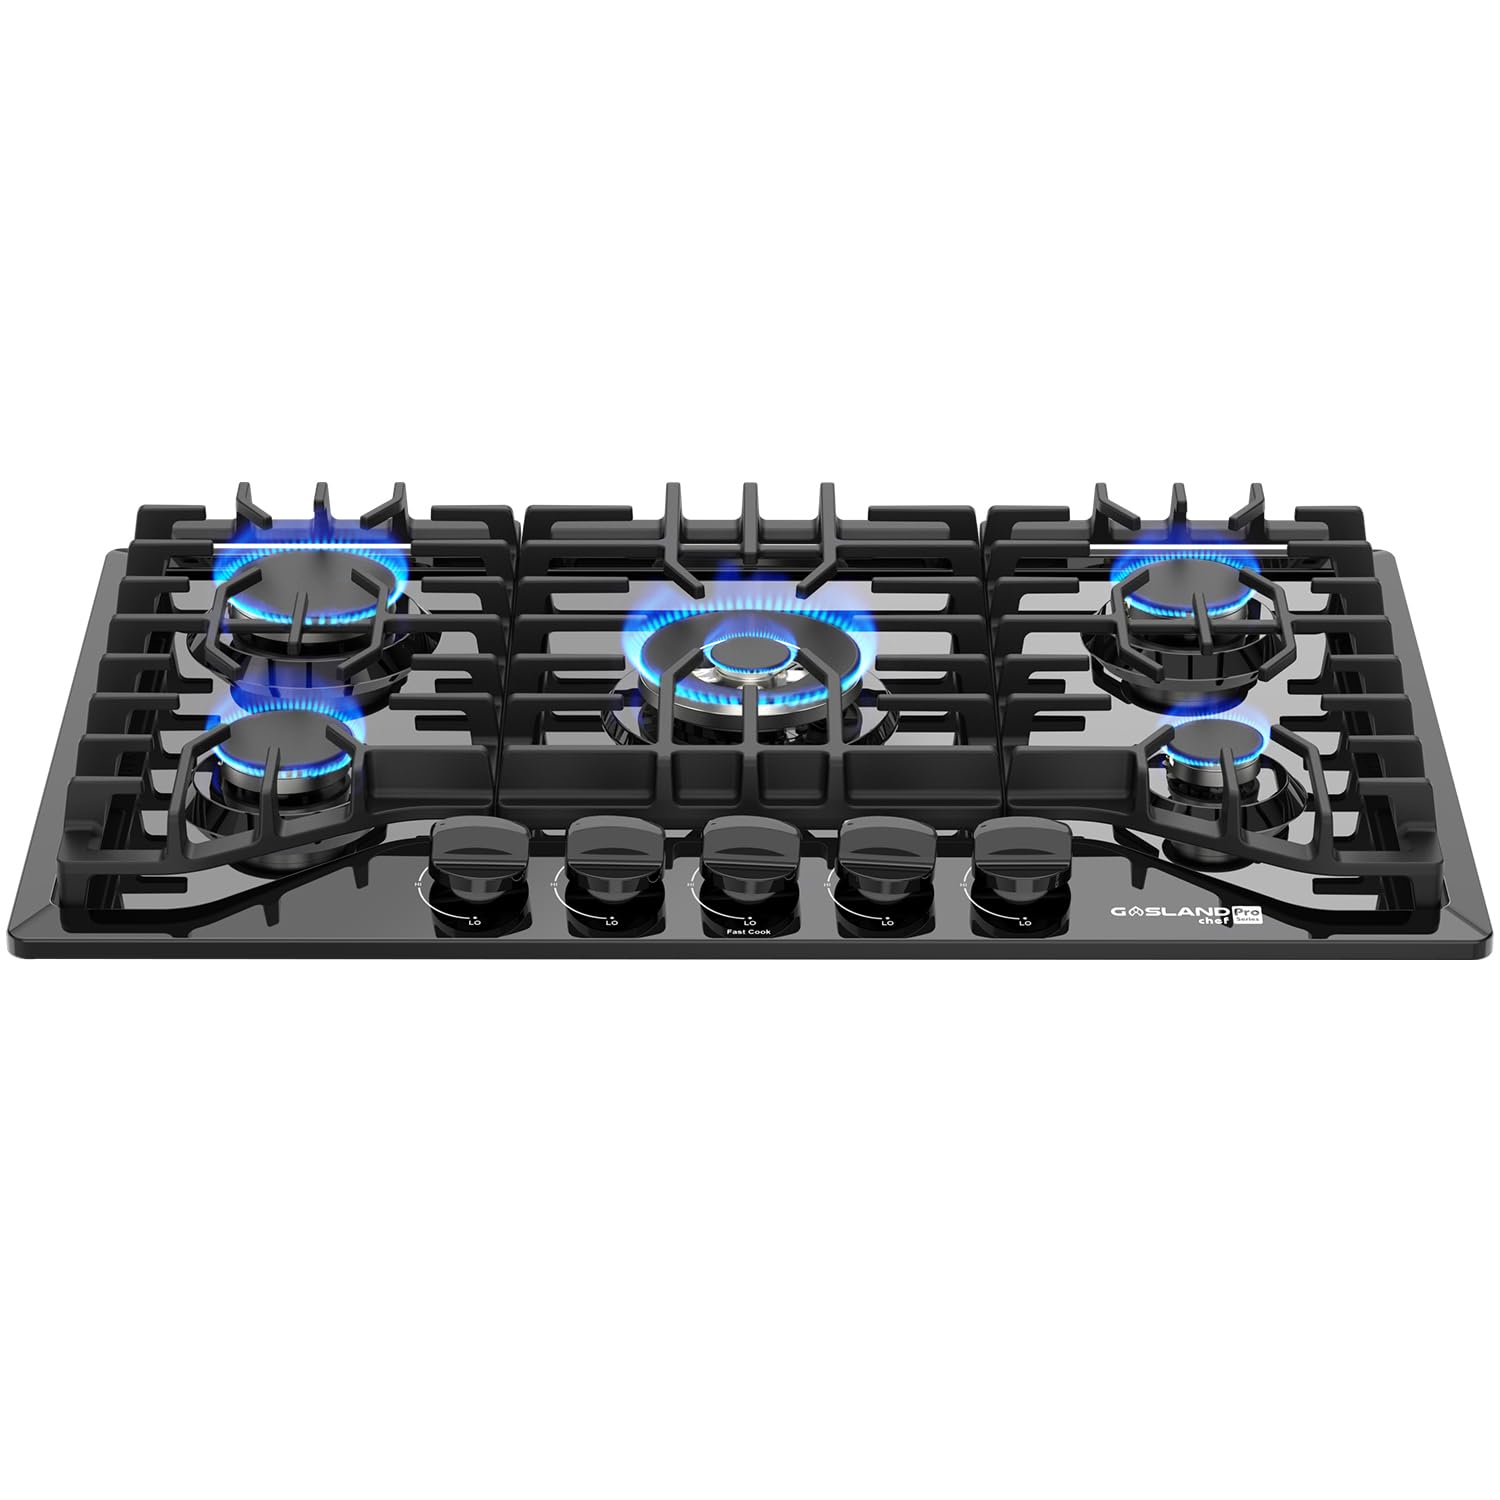 Gas Cooktop 30 Inch, GASLAND Chef PRO GH2305EF 5 Burner Gas Stove, Built-in NG/LPG Convertible Gas Cooktops, Gas Countertop Plug-in with Thermocouple Protection, Black